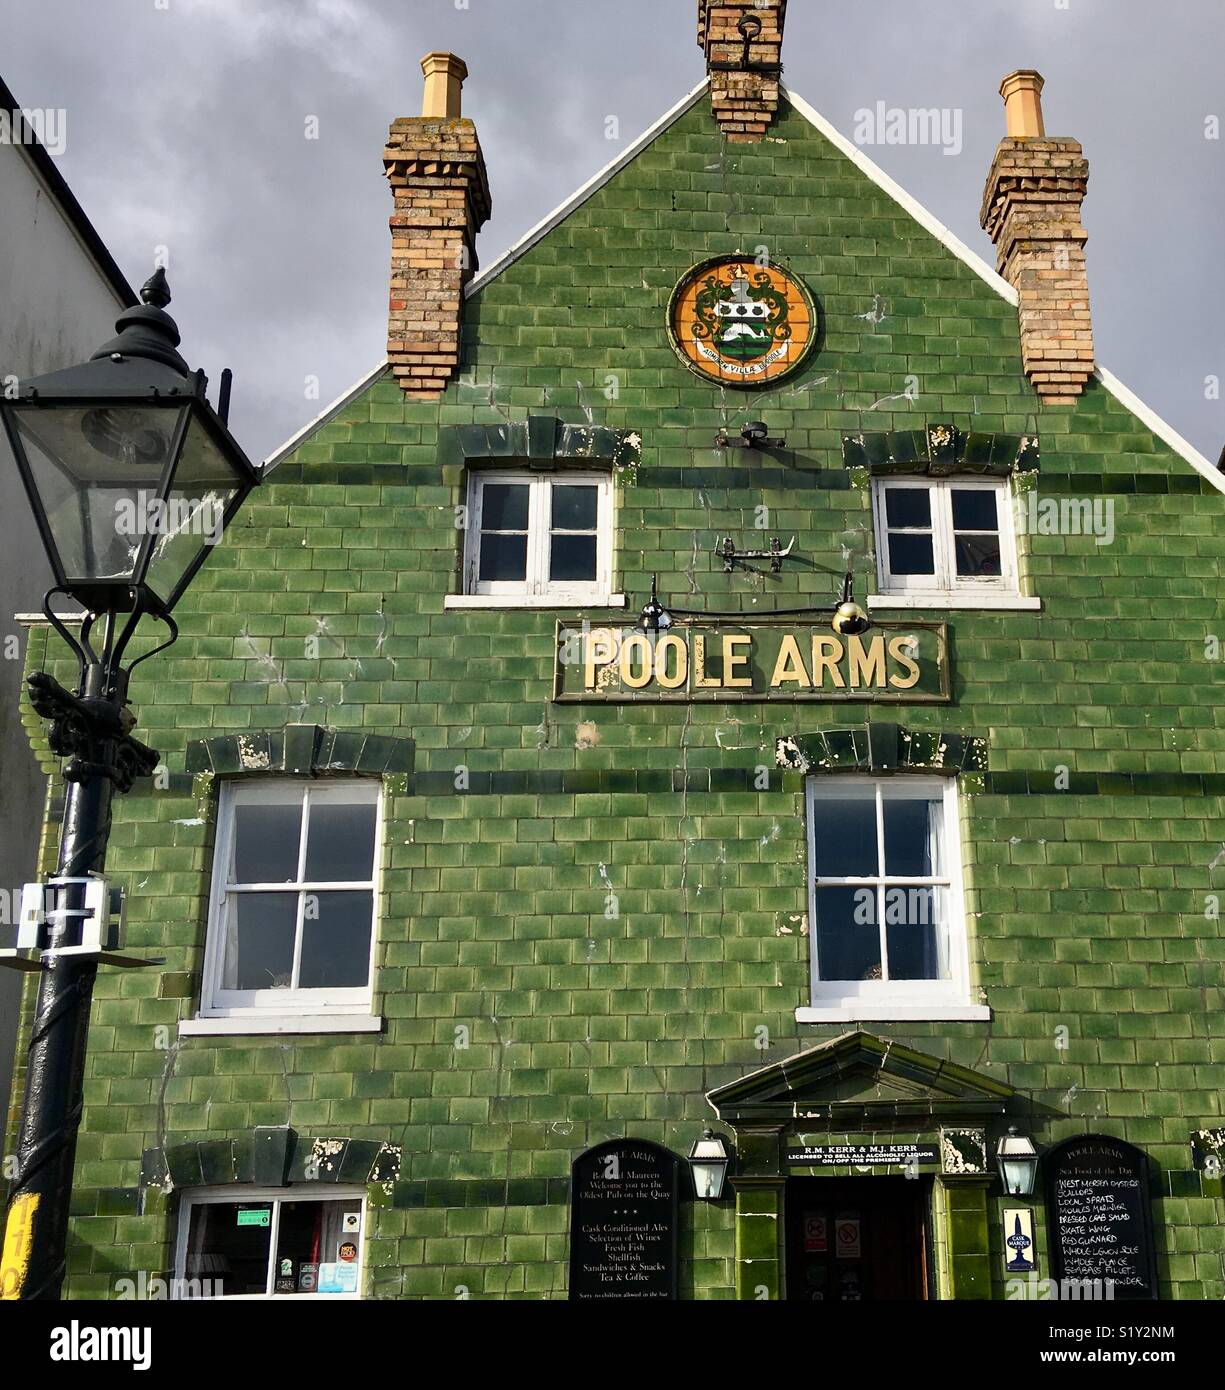 Poole Arms public house, Poole, Dorset, an historic building covered in green ceramic tiles. Stock Photo